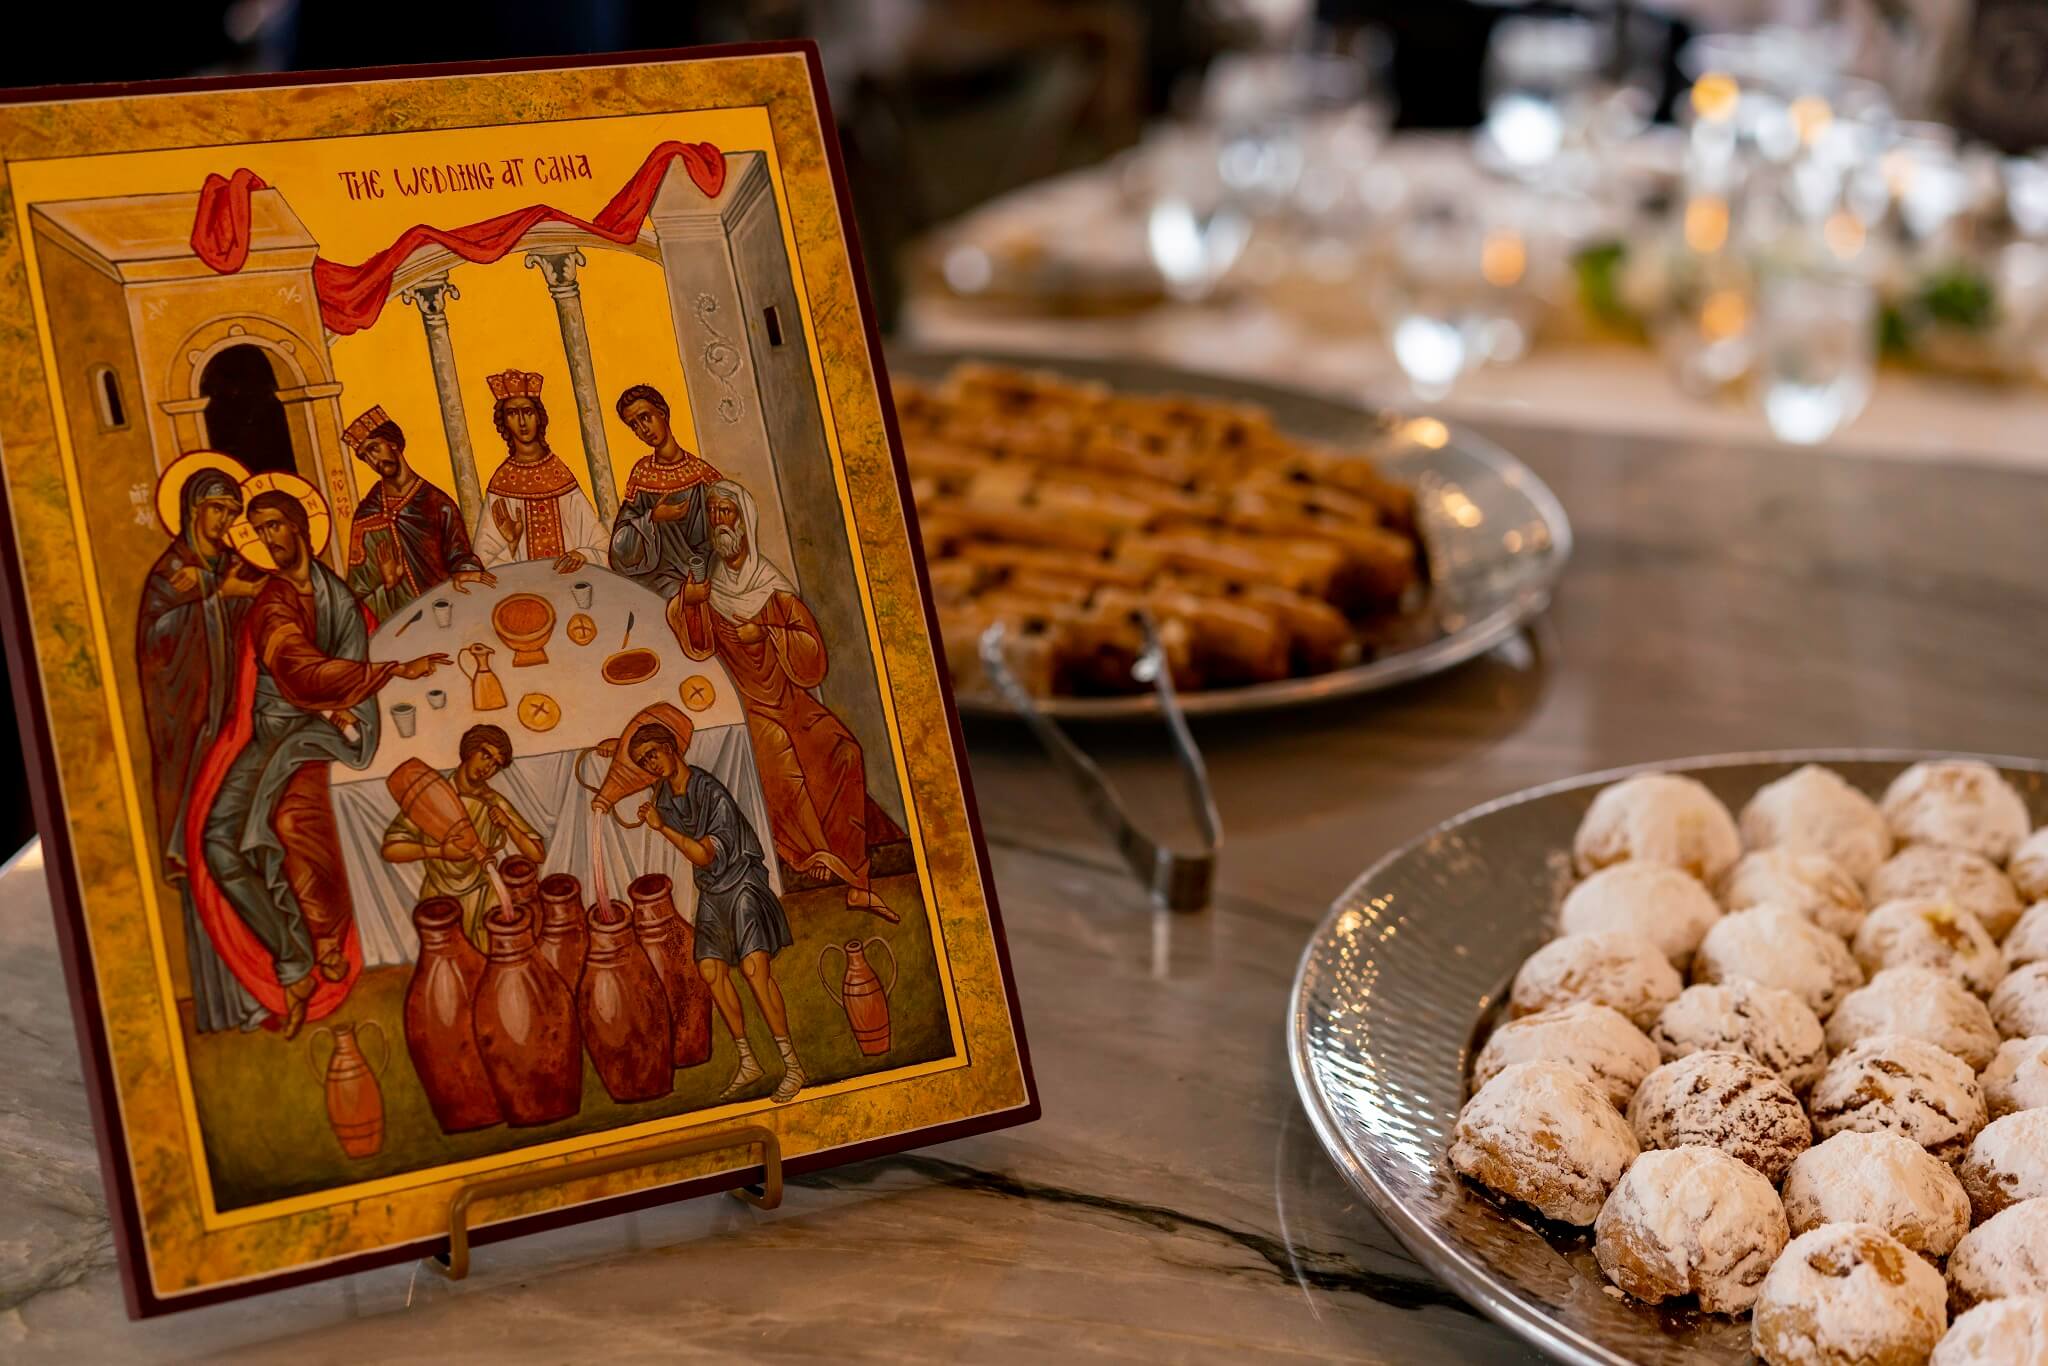 Framed artwork of the Wedding at Cana beside different pastries